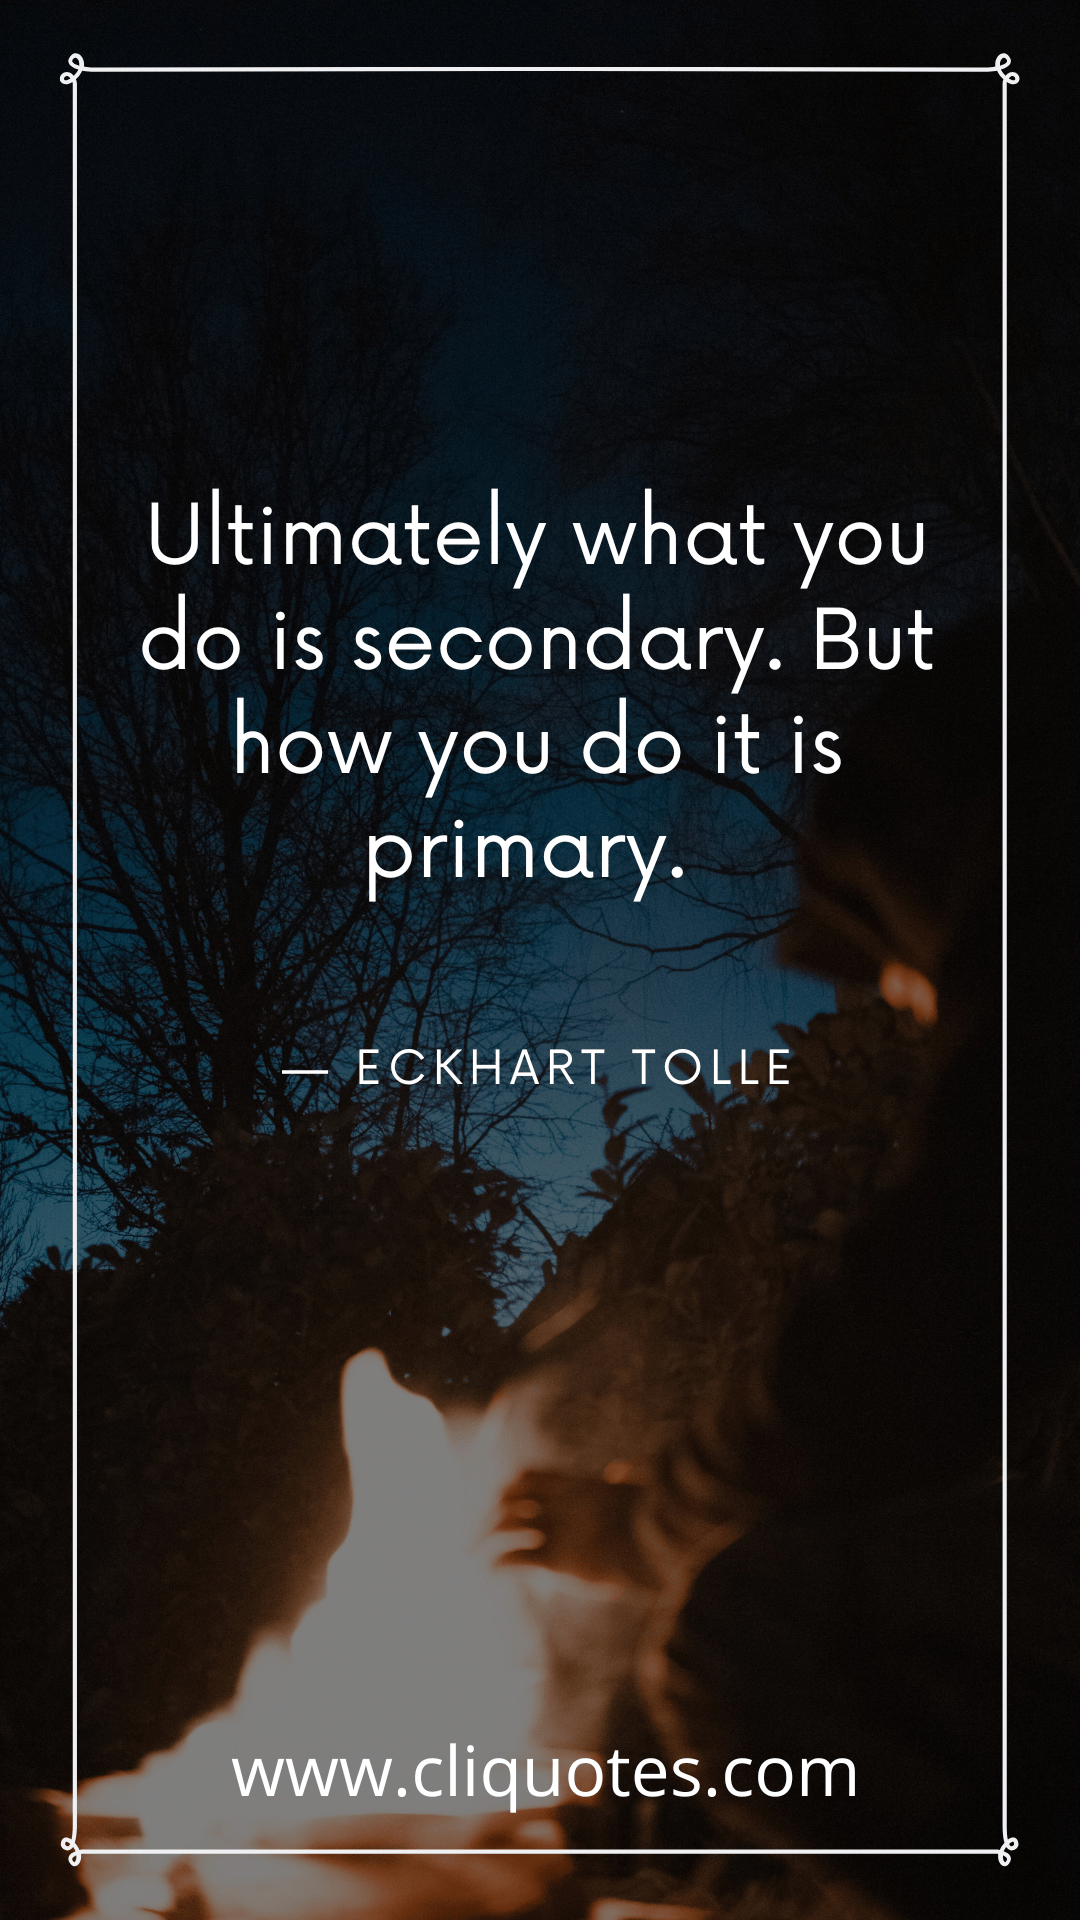 Ultimately what you do is secondary. But how you do it is primary. — ECKHART TOLLE